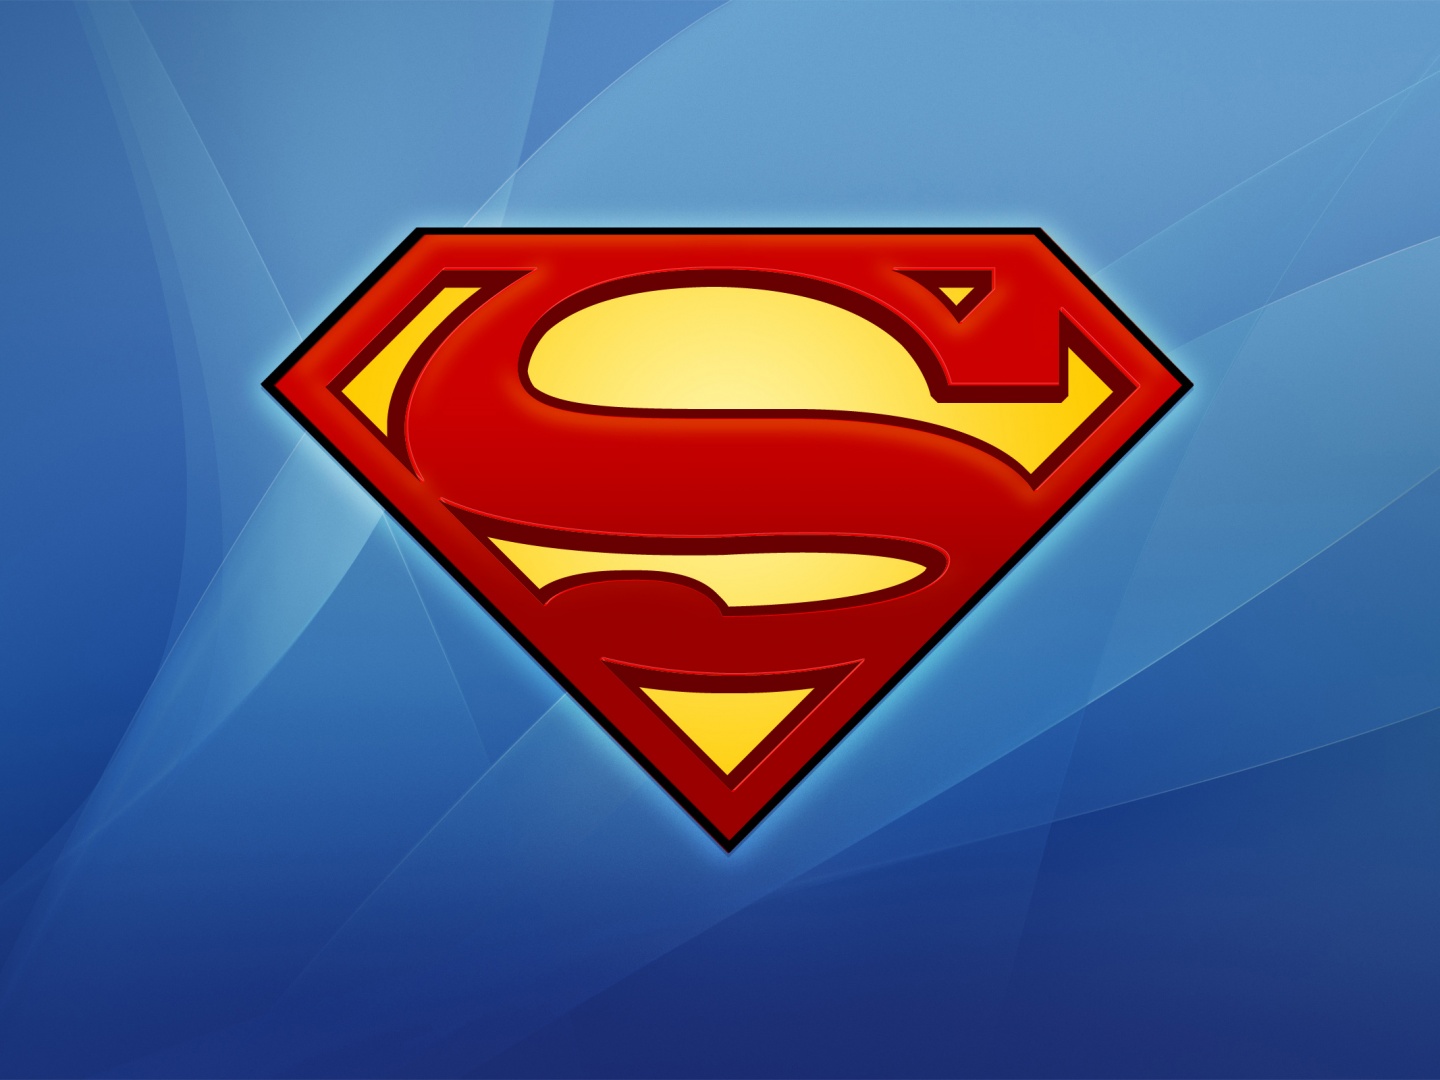 Superman HD Wallpaper For Desktop Pictures To